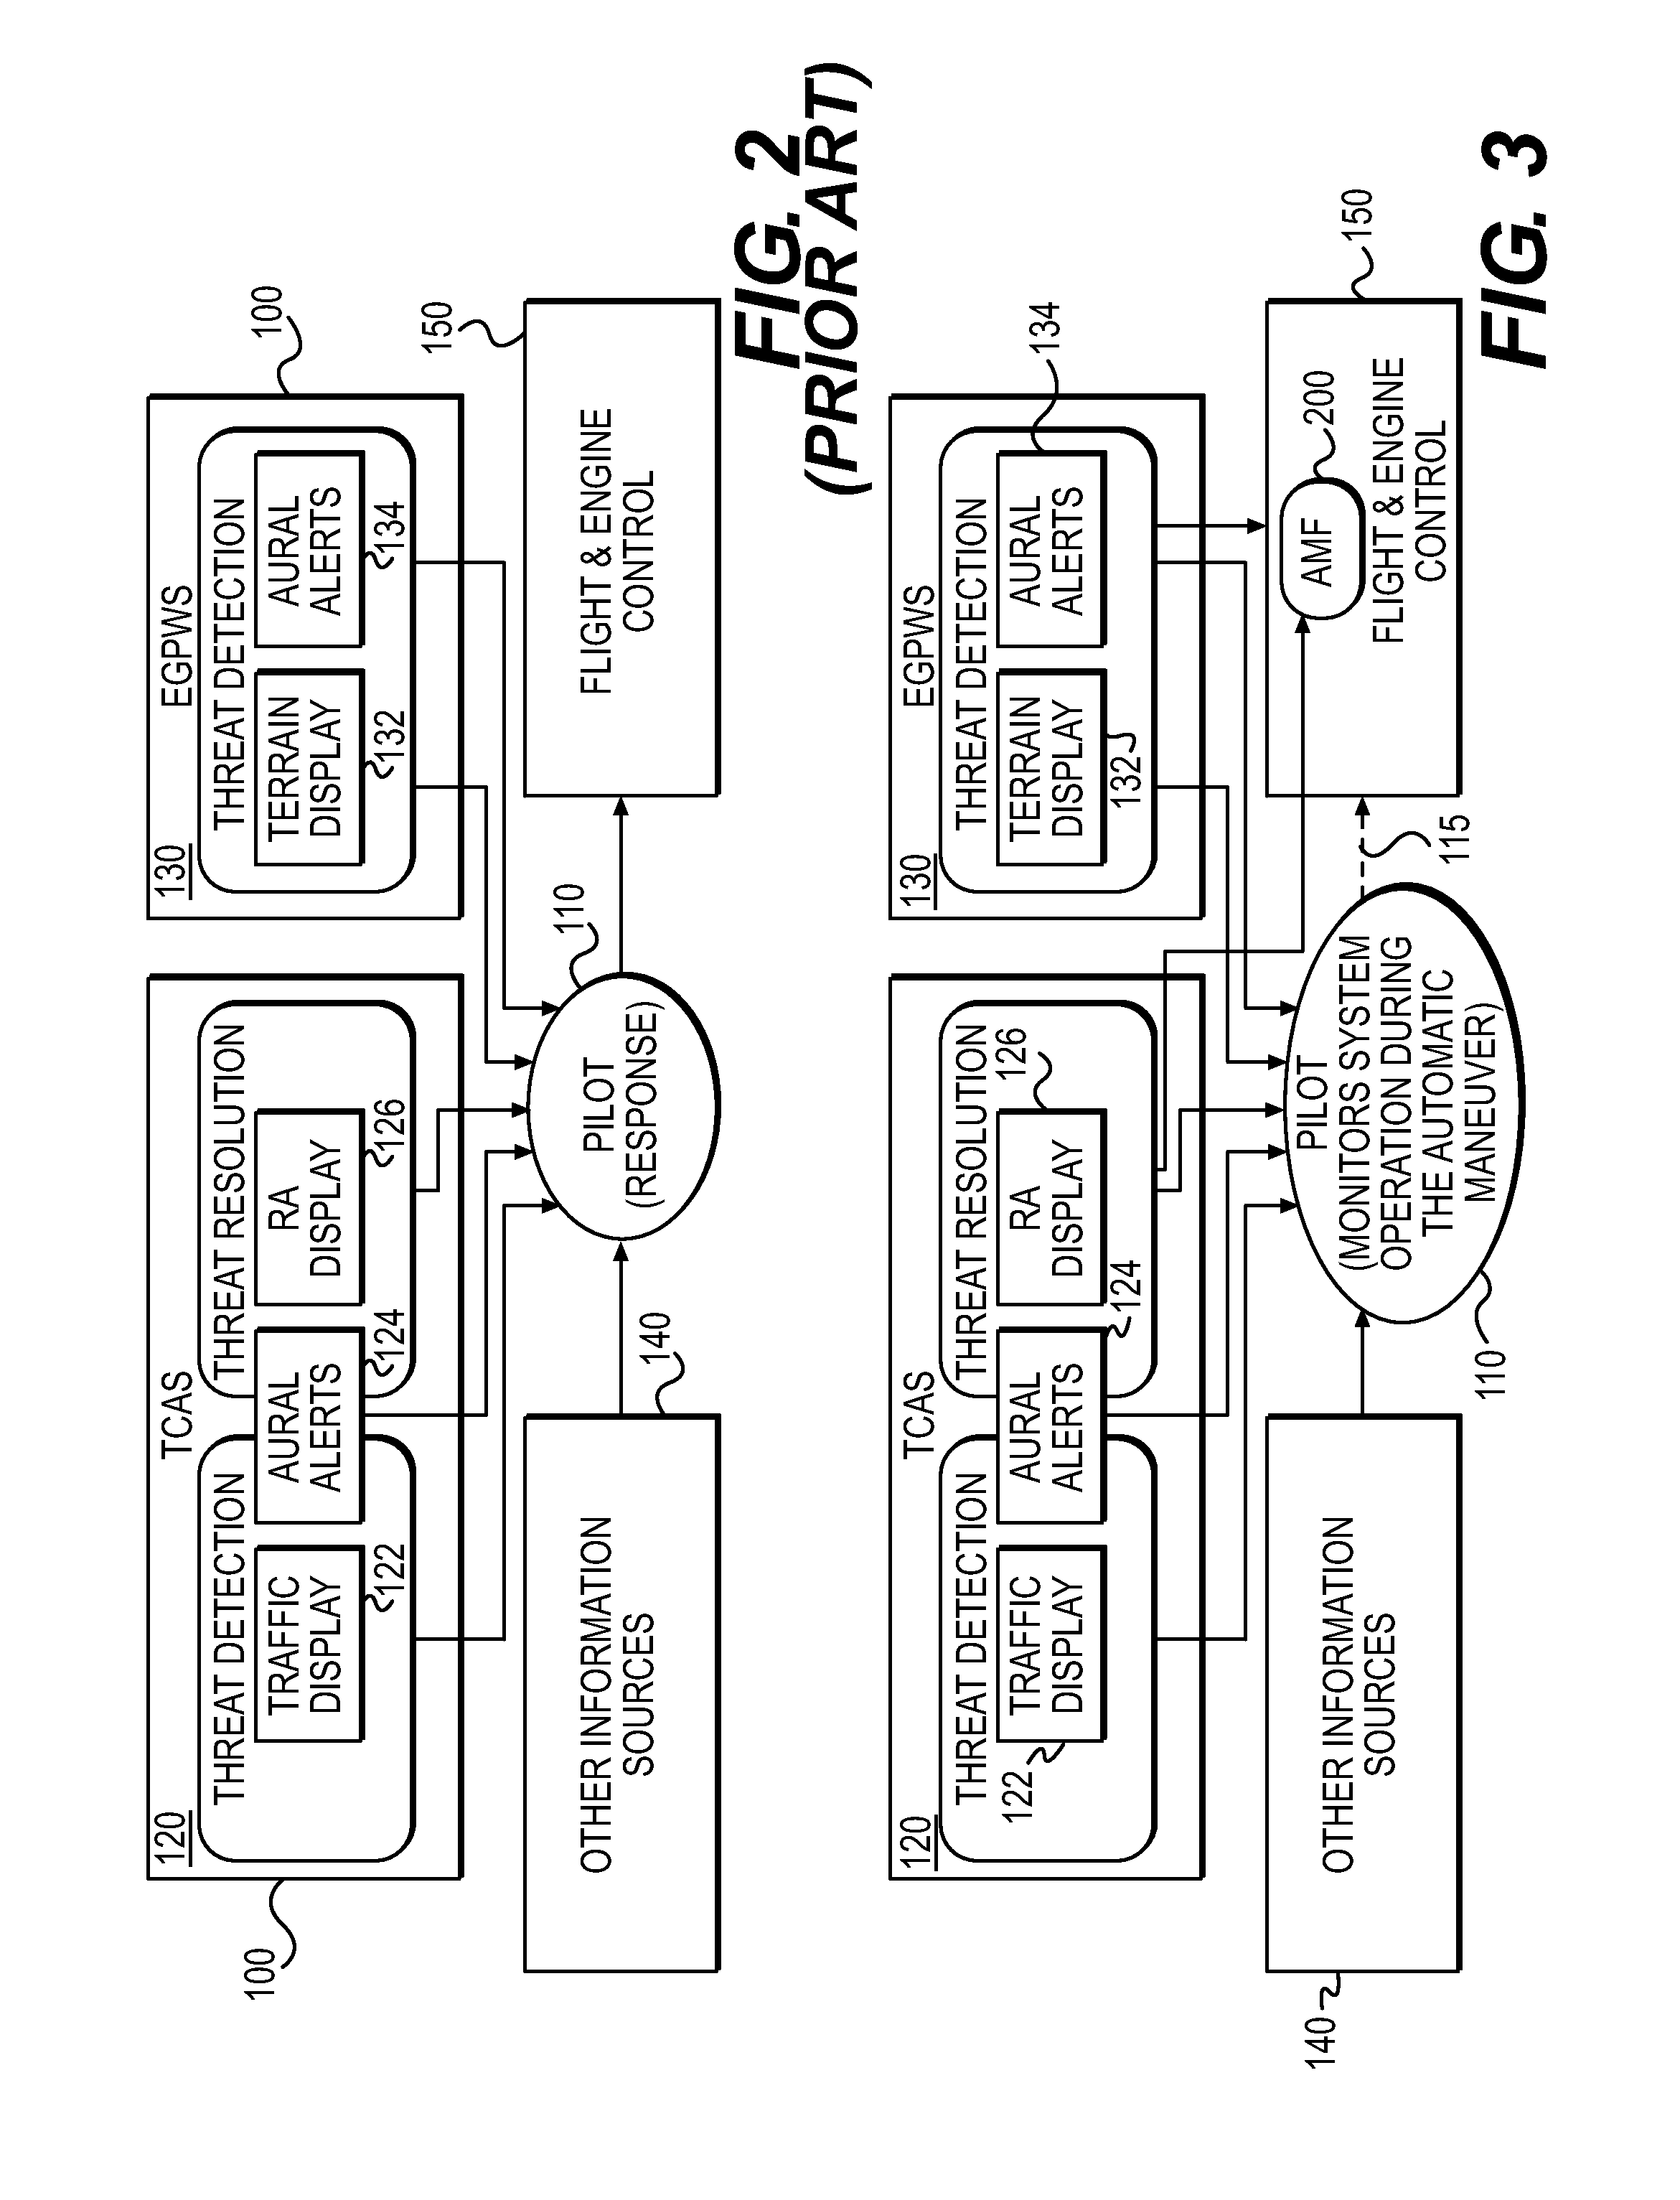 Methods and systems for translating an emergency system alert signal to an automated flight system maneuver